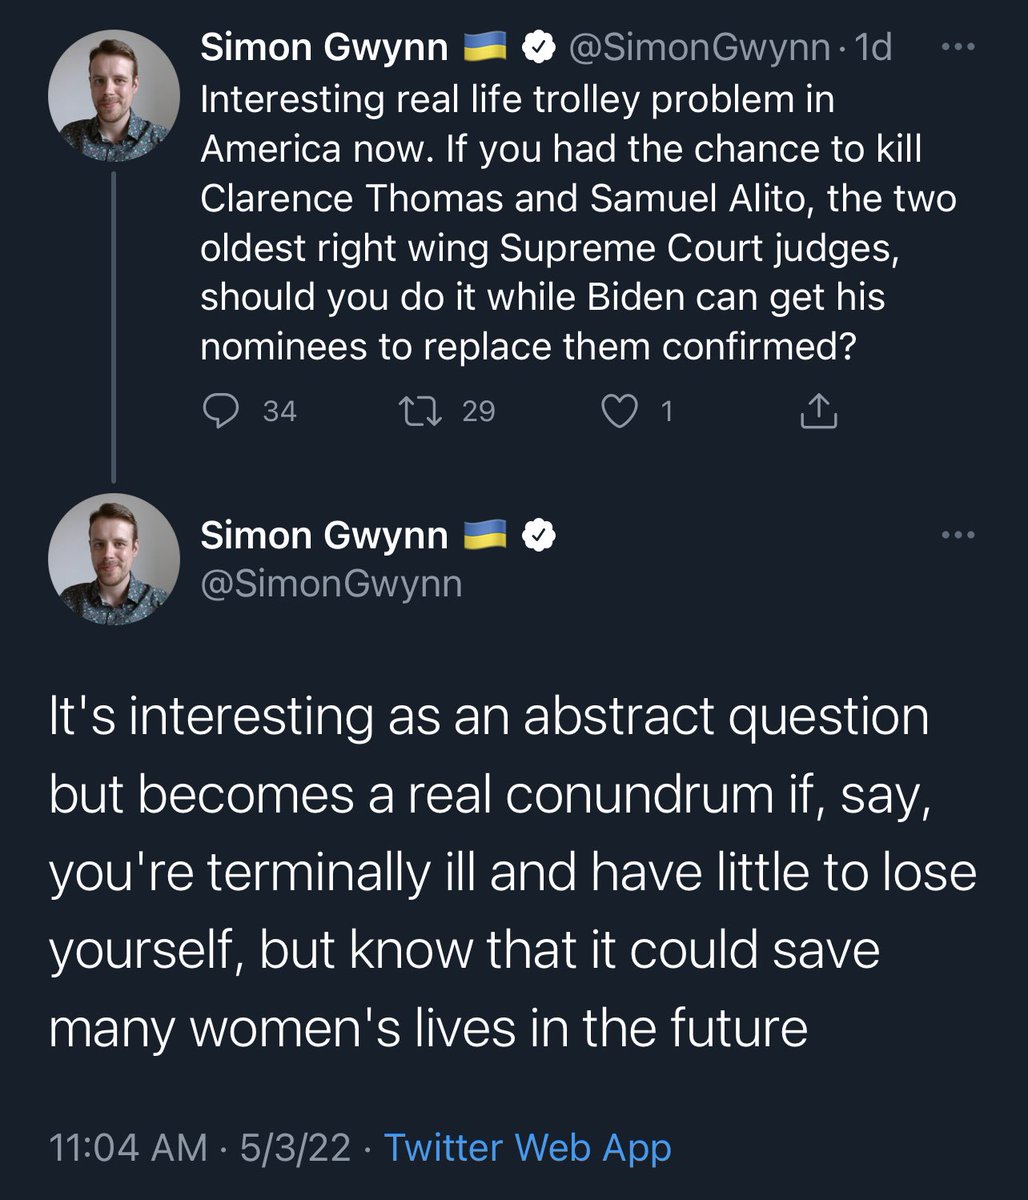 @SimonGwynn The internet never forgets and you absolutely put out a call for violence